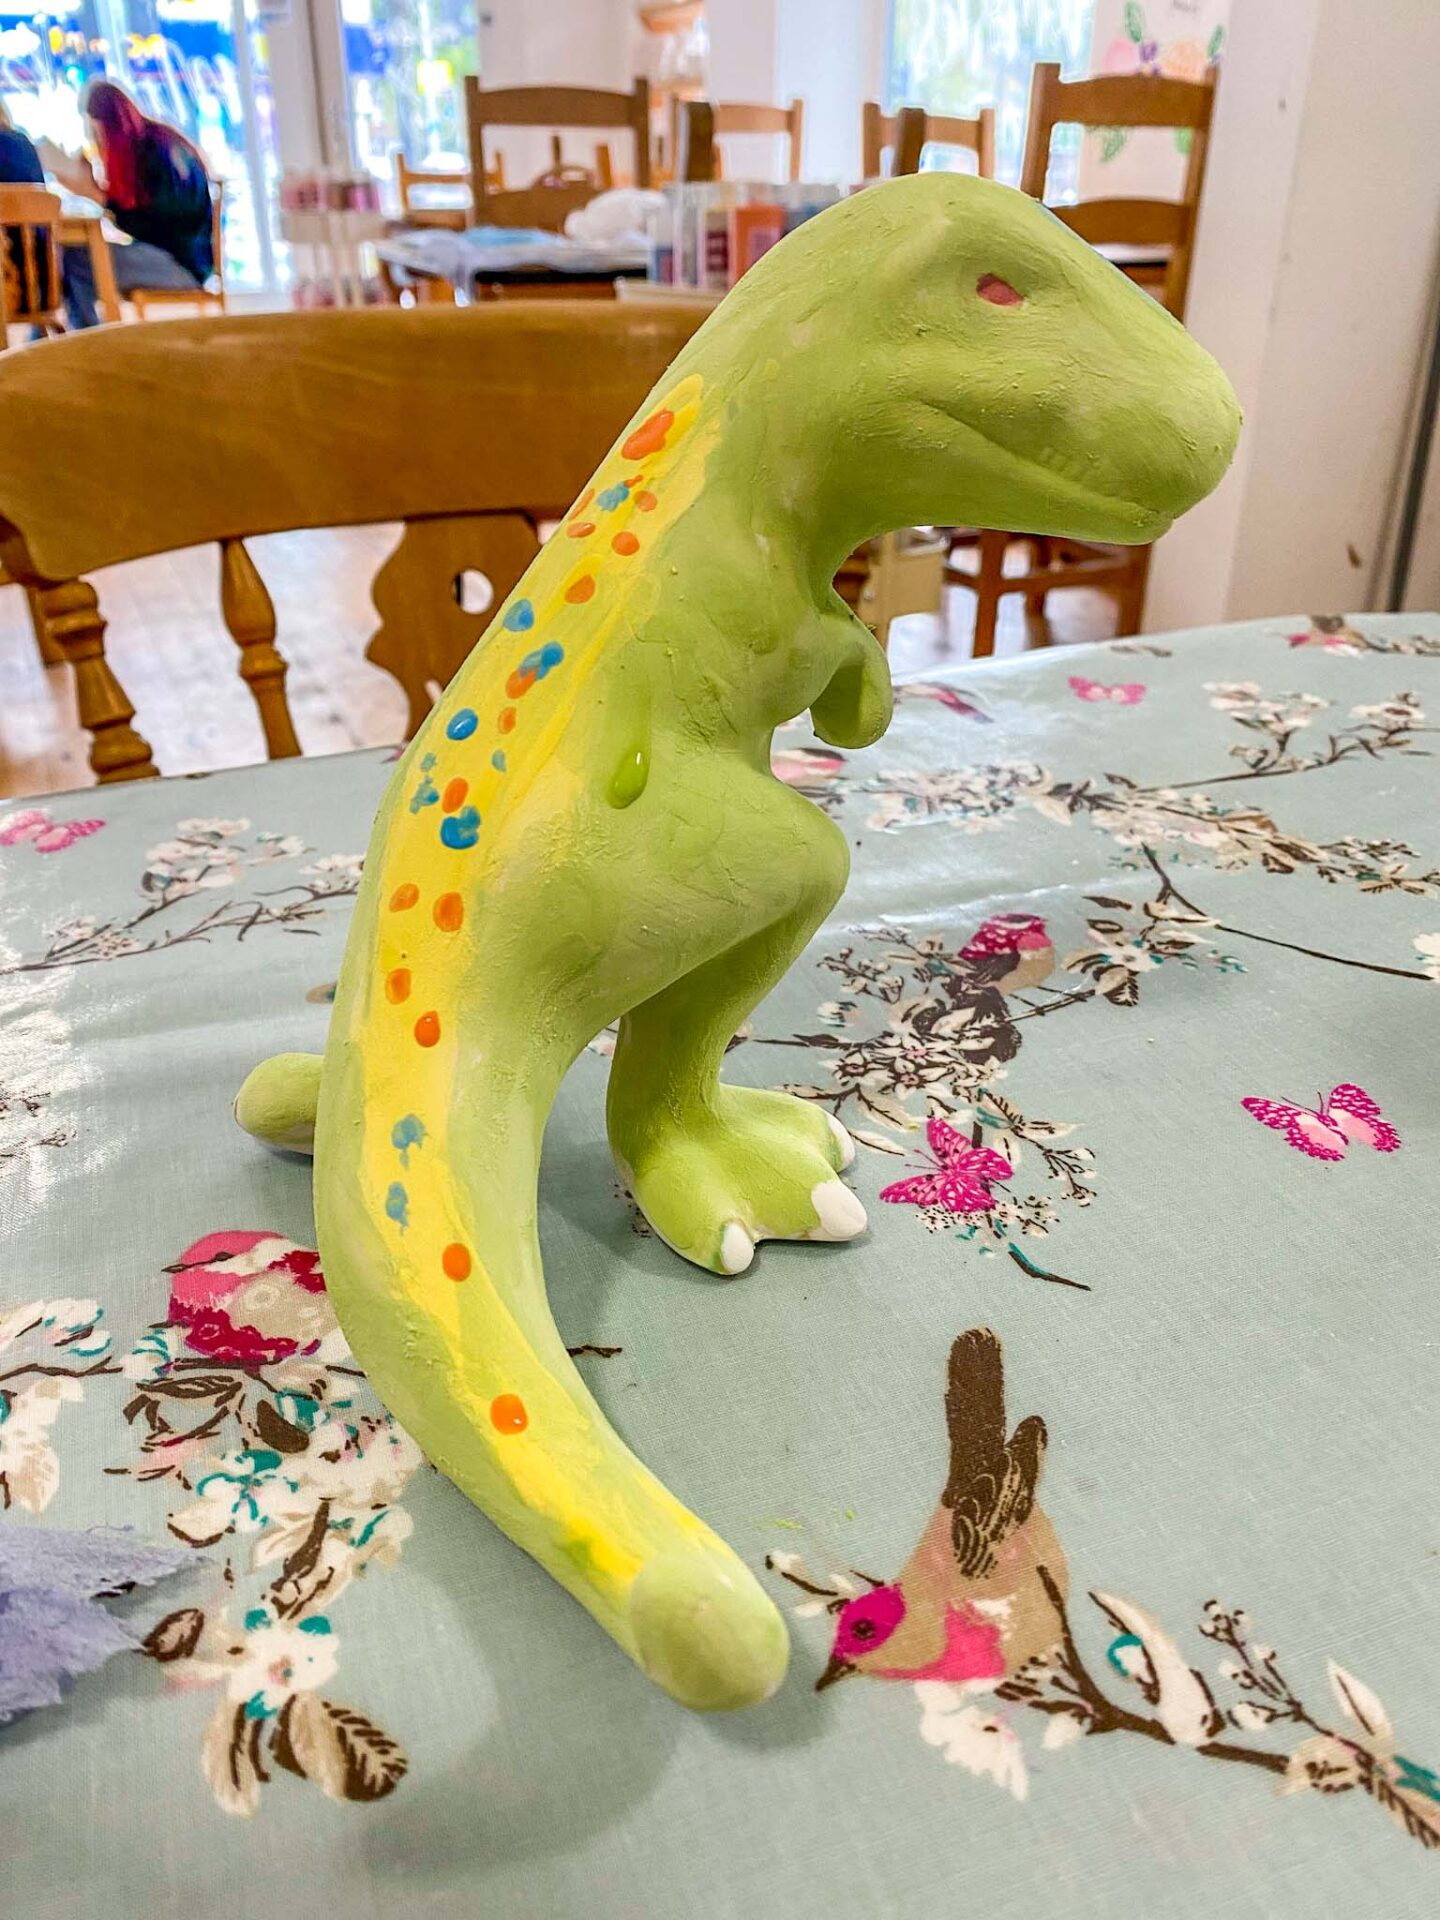 Things to do in Altrincham, Painted Dinosaur at Bean and Brush art cafe,